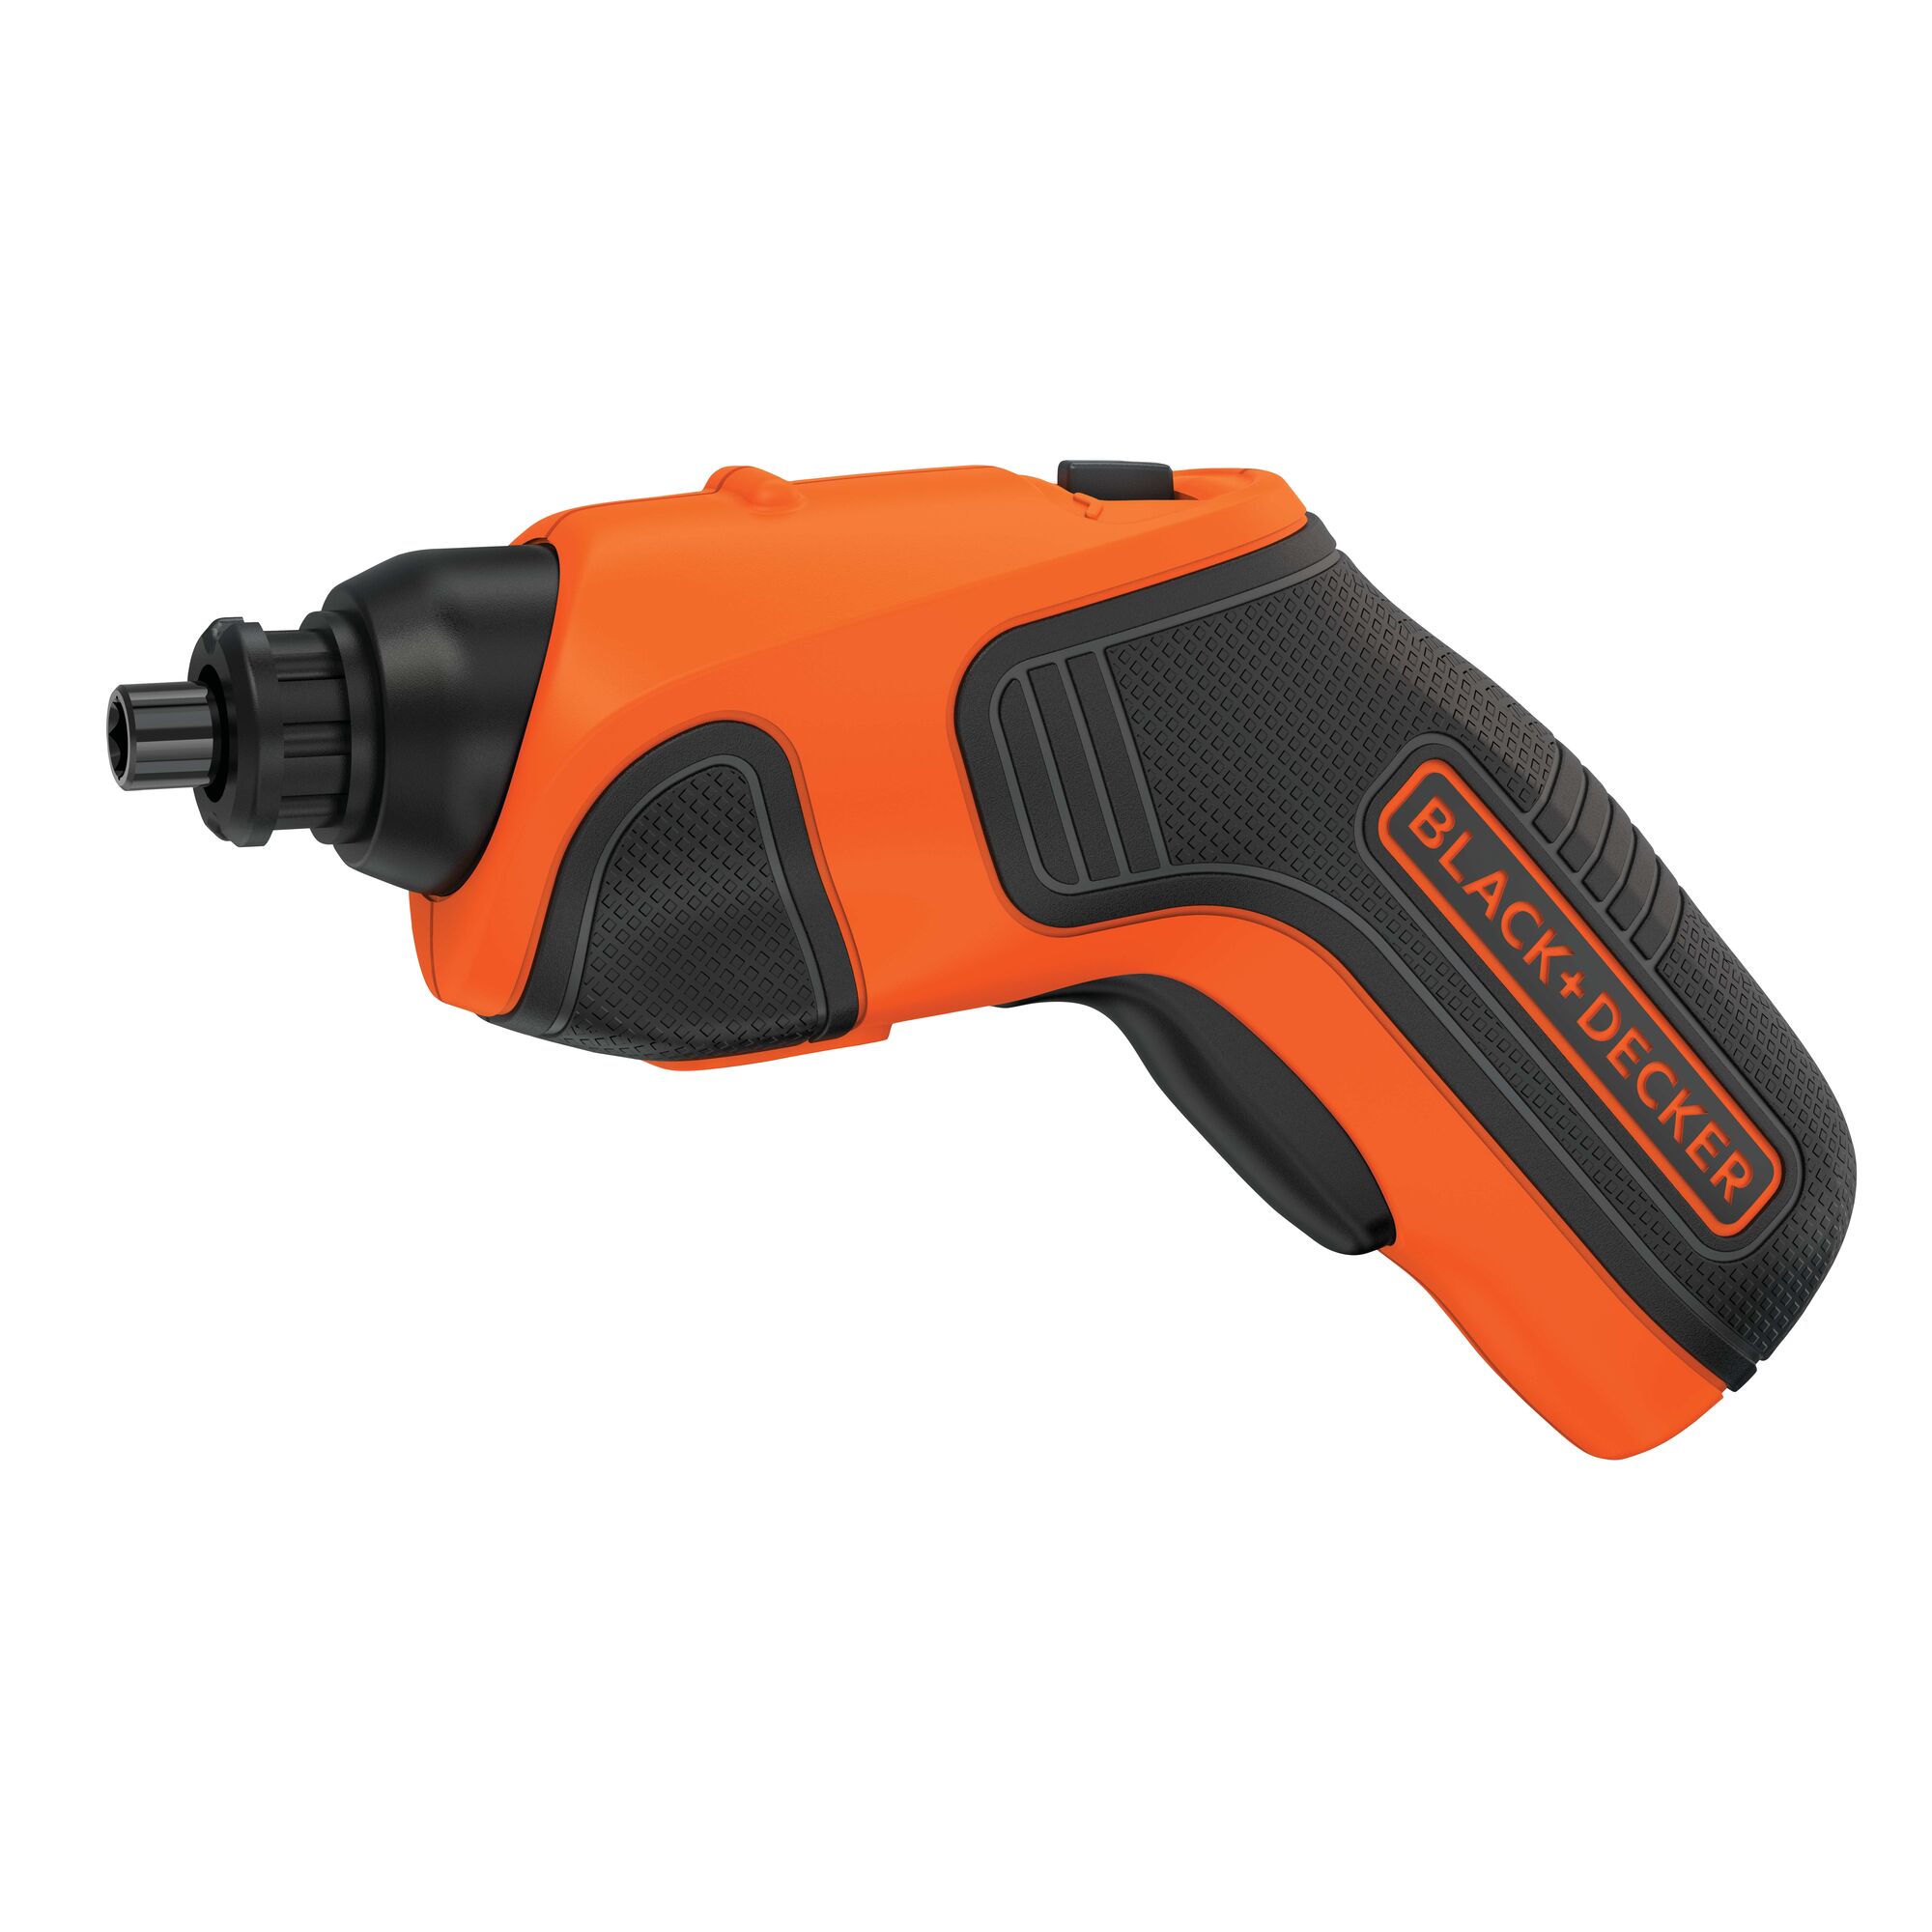 Profile of 4 volt MAX Lithium Rechargeable Screwdriver.